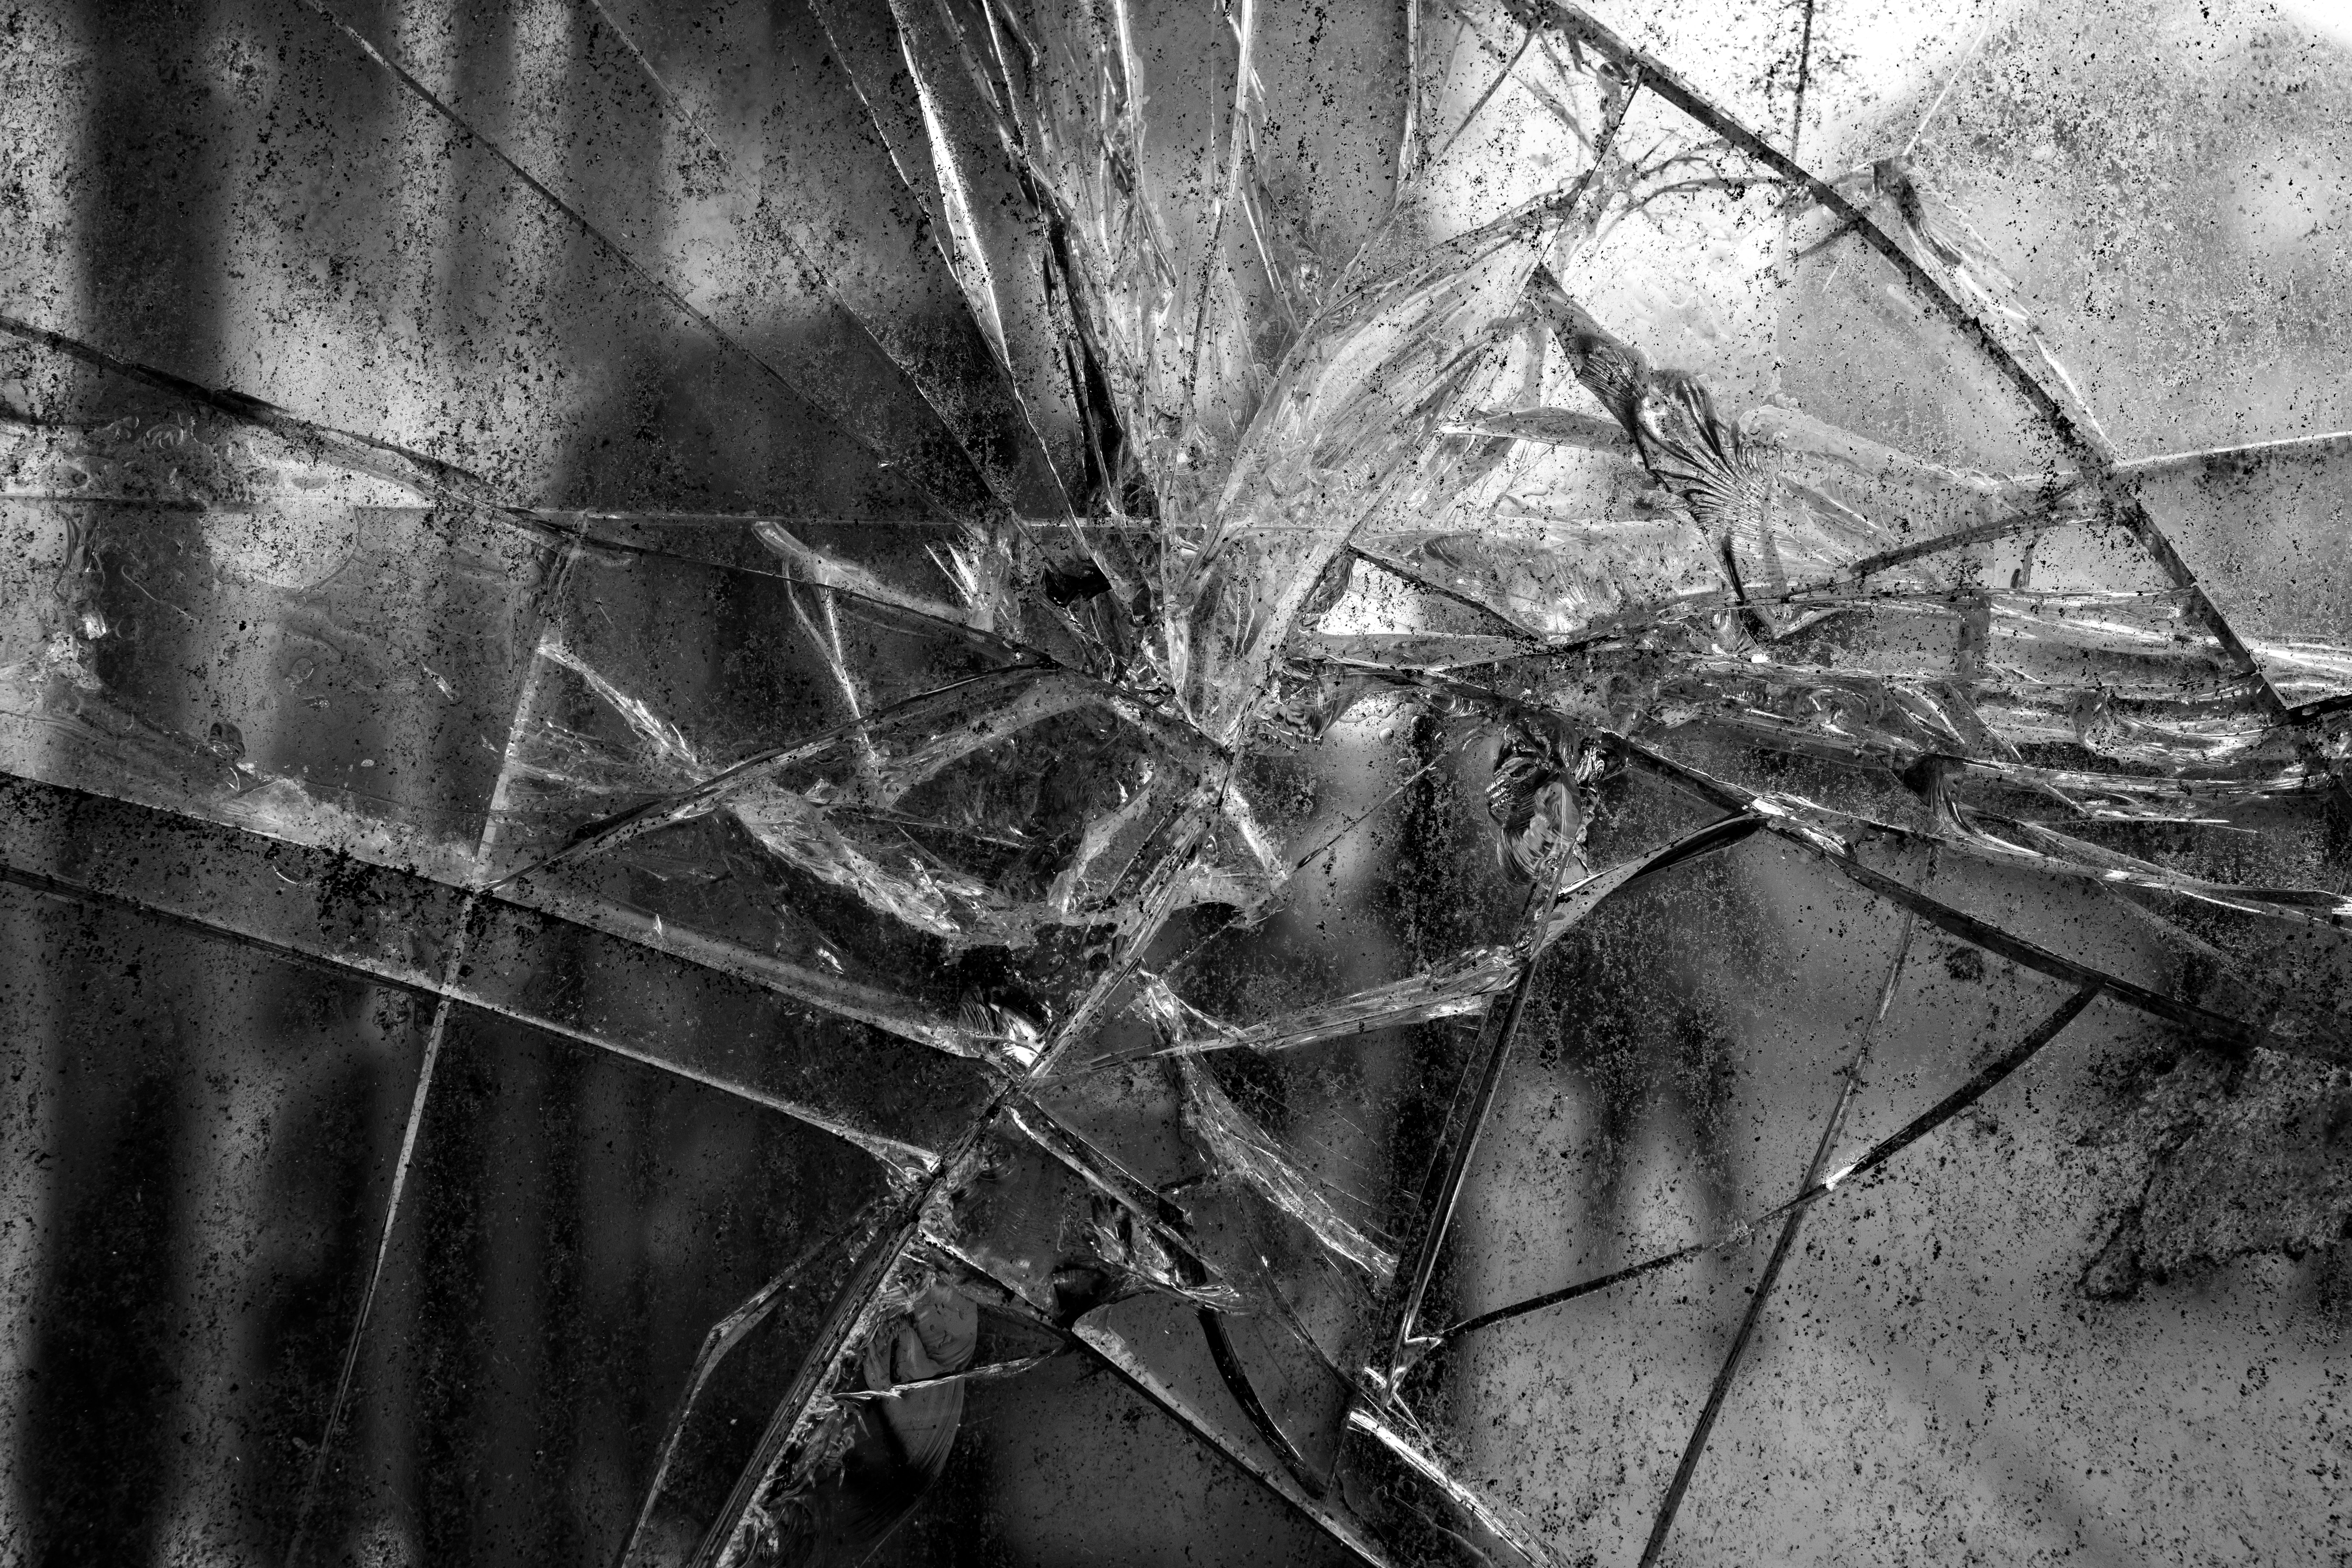 Cracked glass in a window.